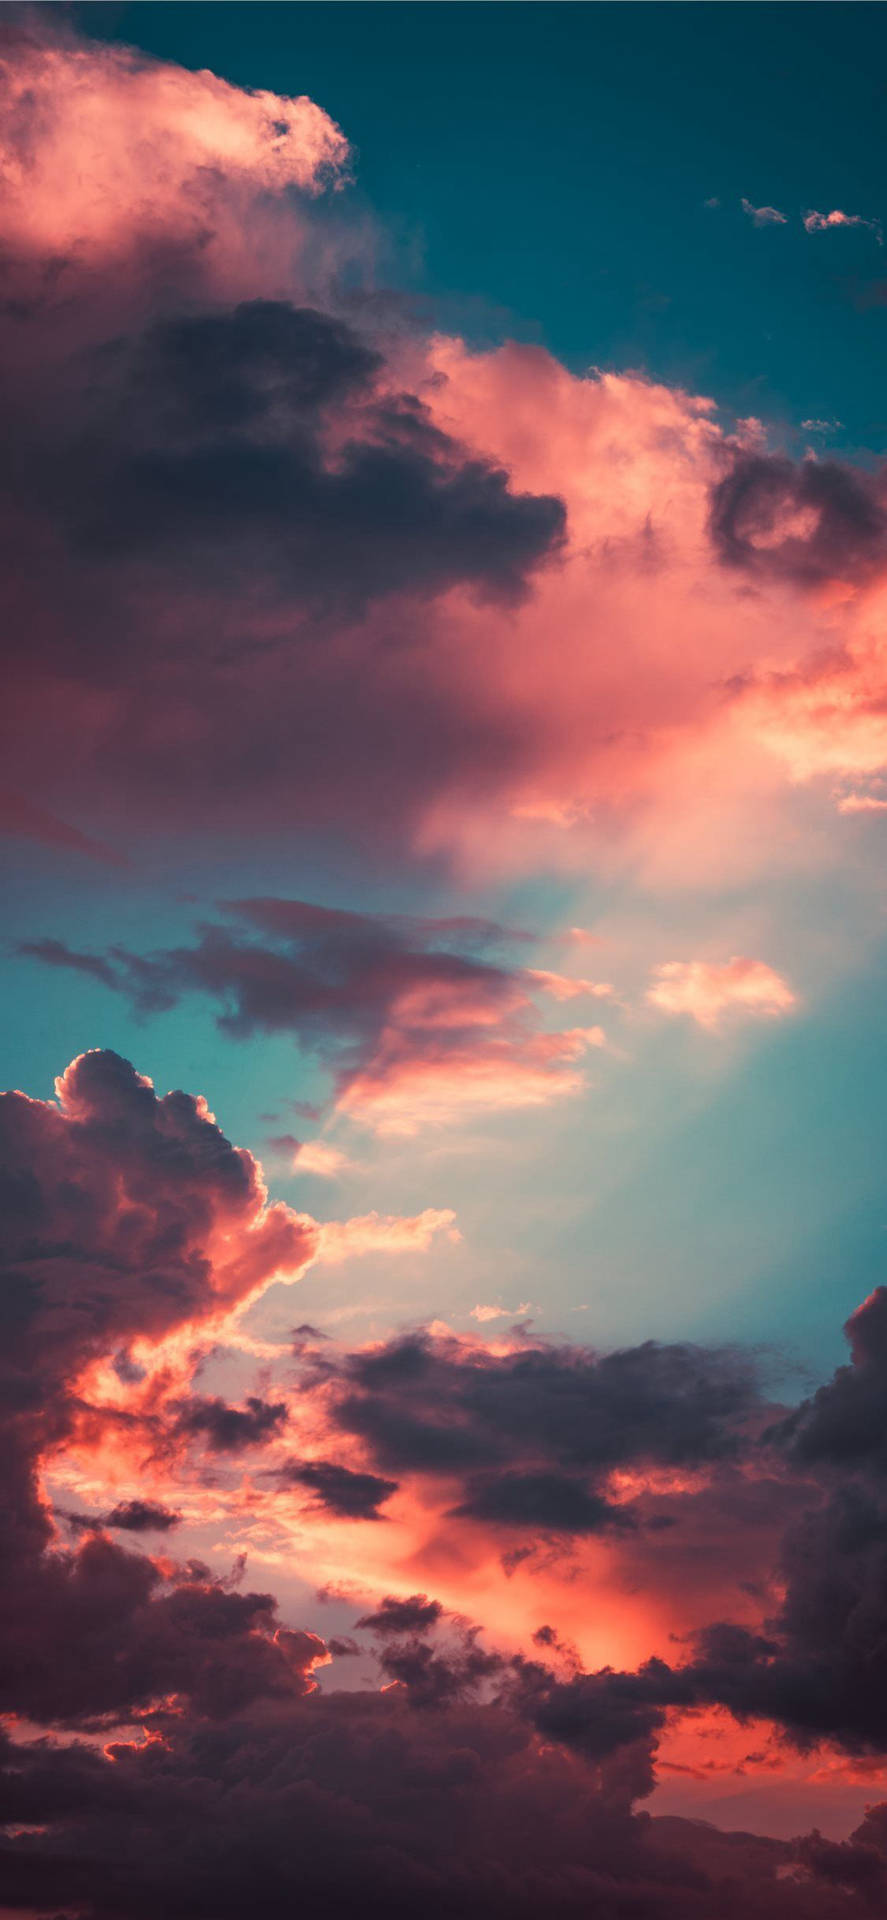 Aesthetic Cloudy Sky For IPhone Wallpaper